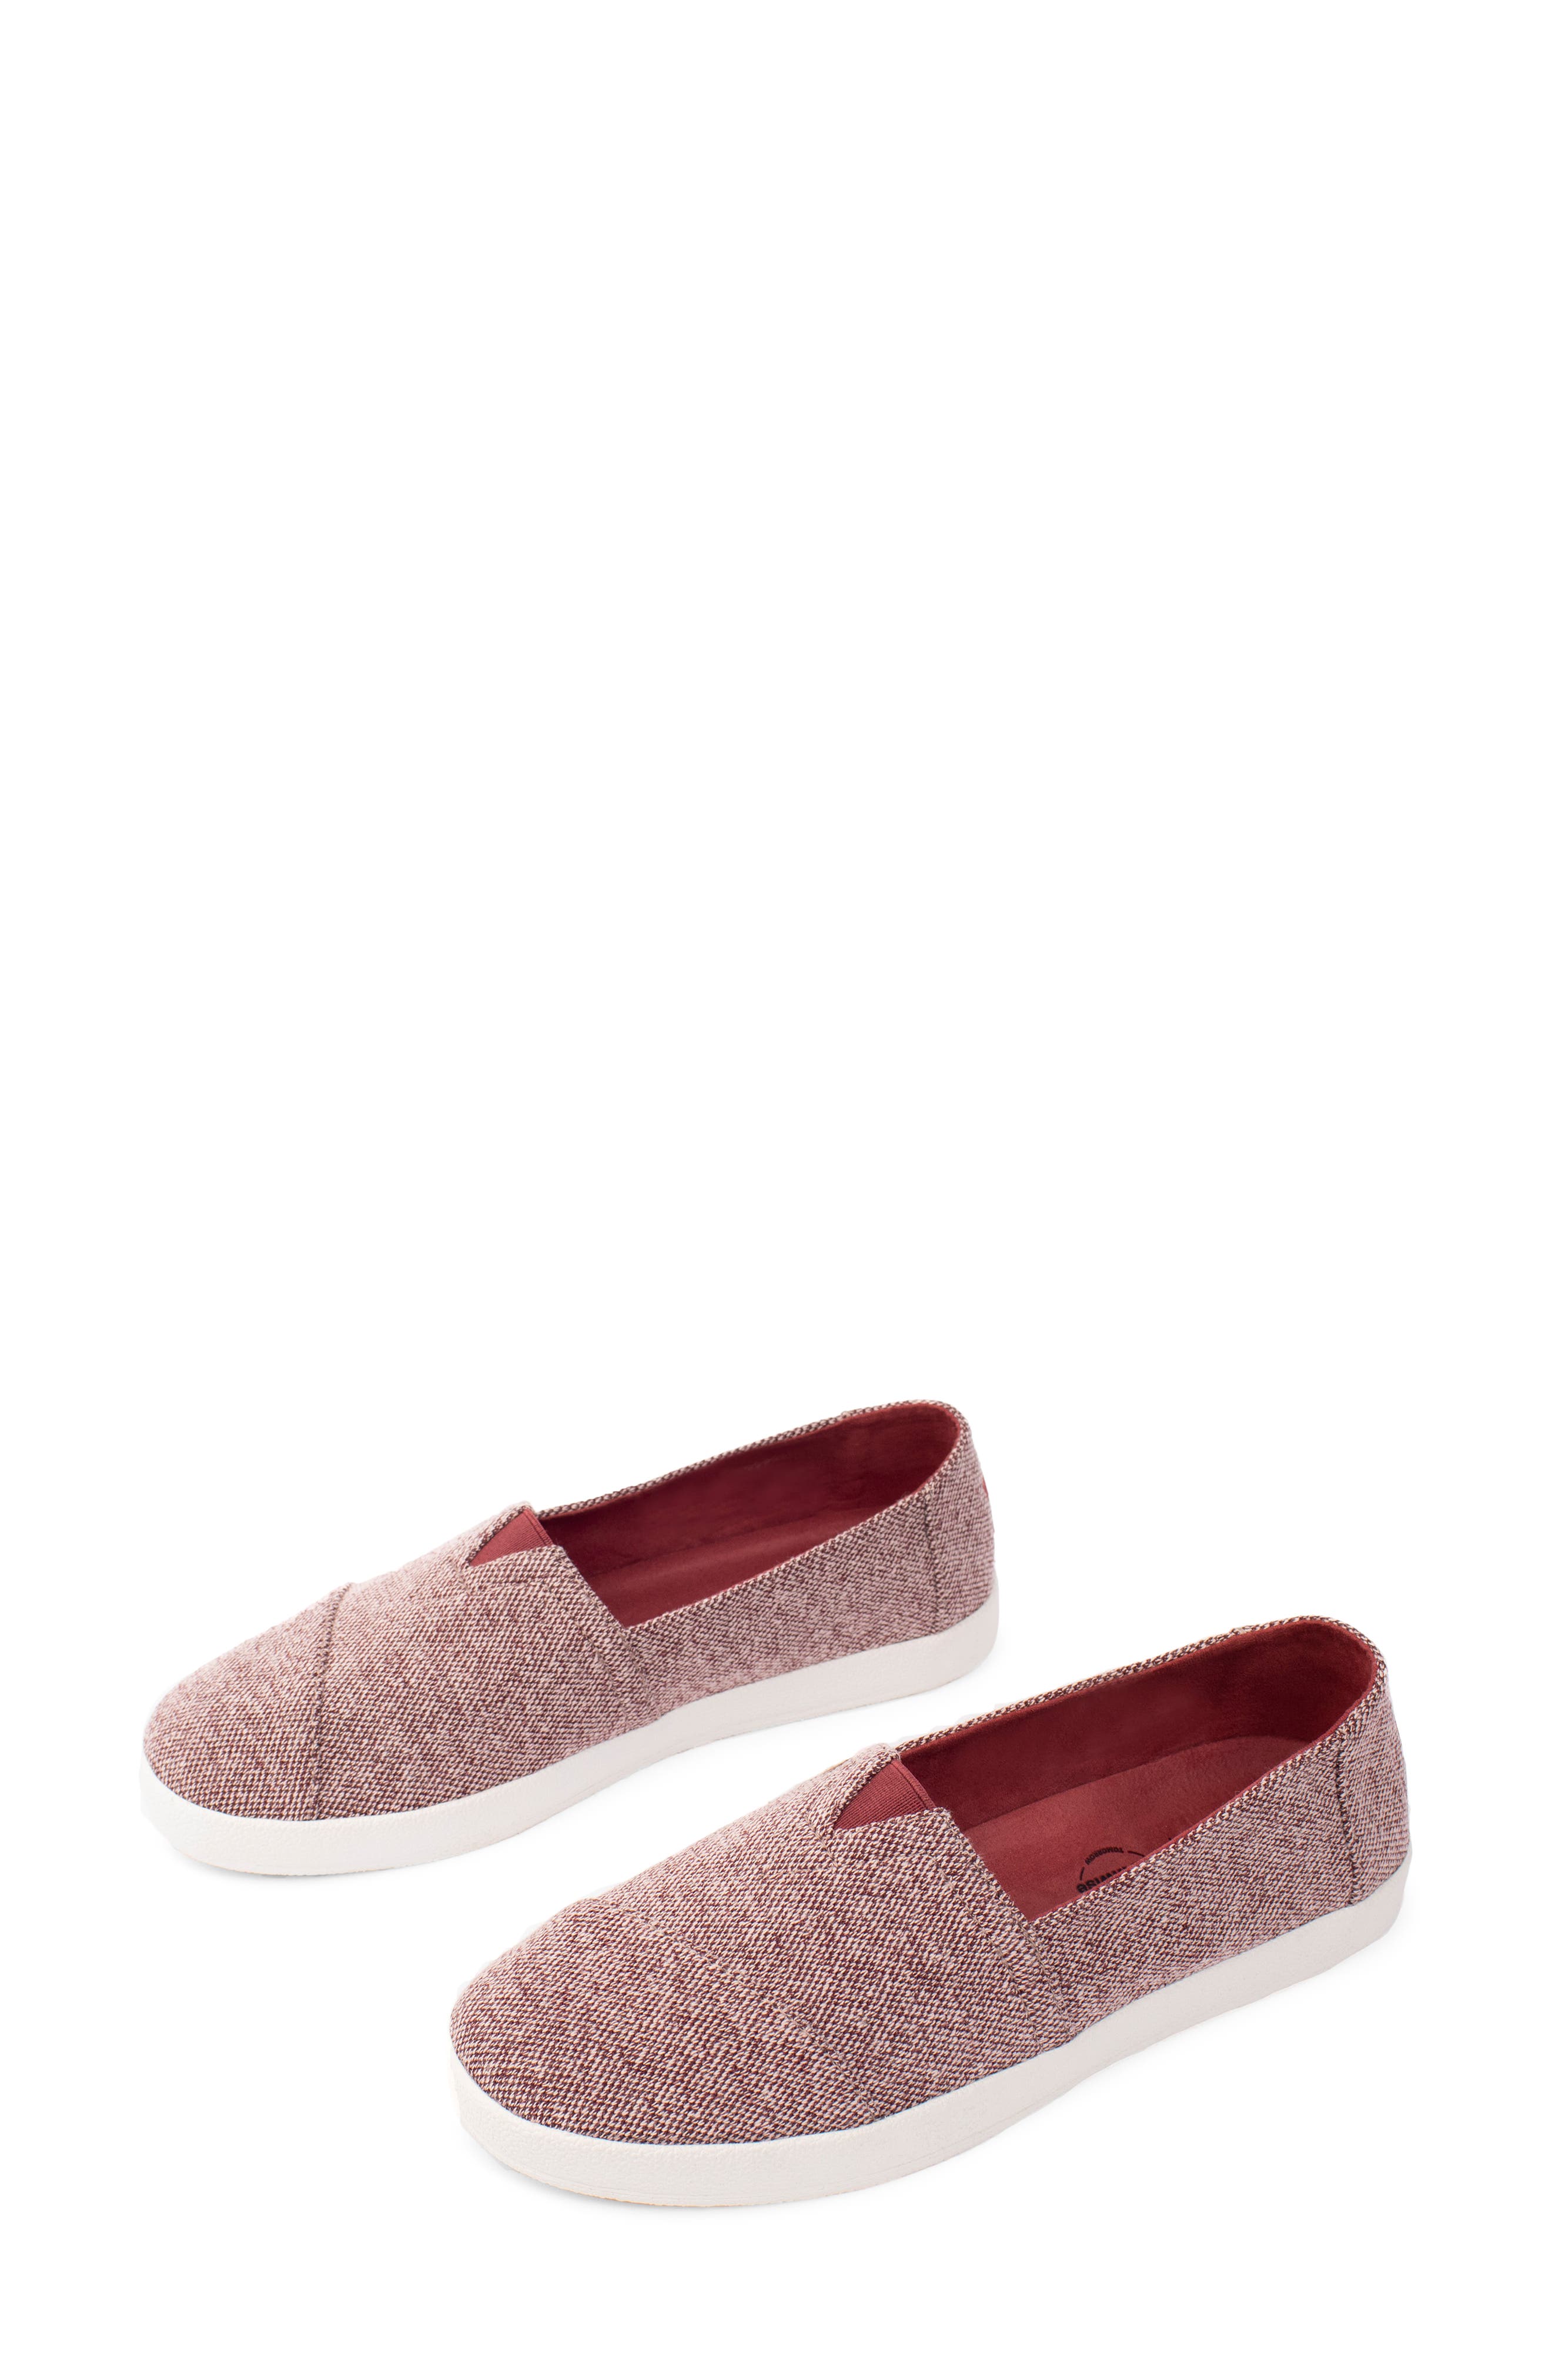 toms womens shoes canada